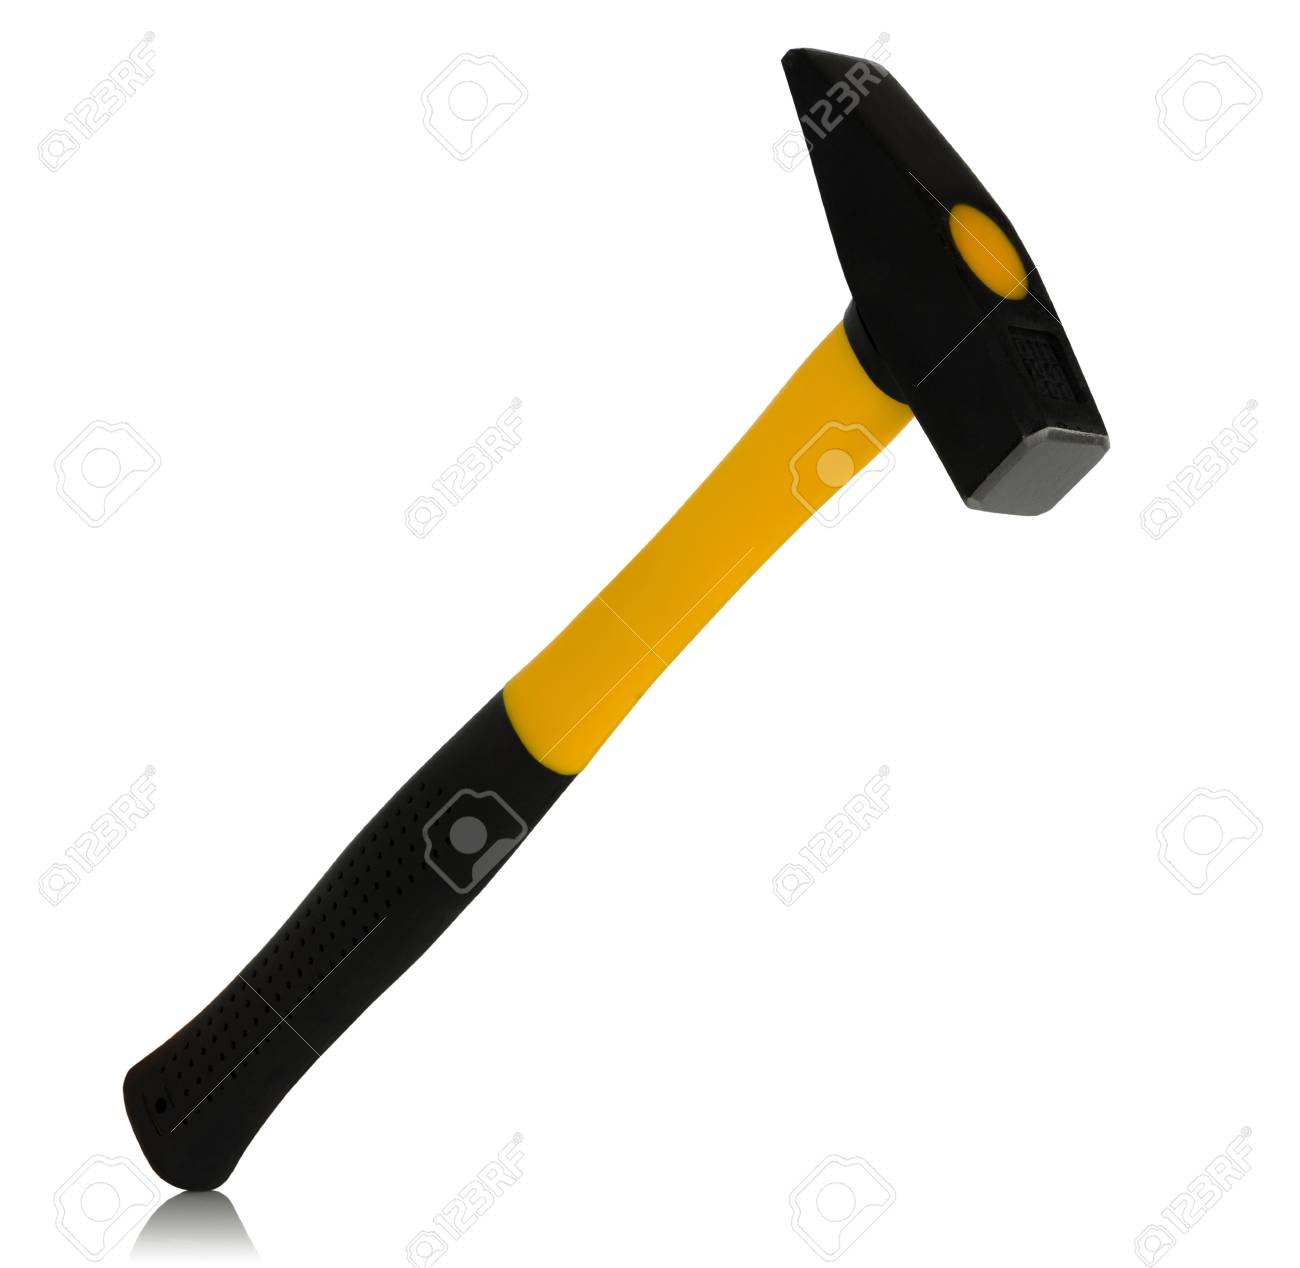 Machinist Hammer With Fiberglass Handle On White Background Stock